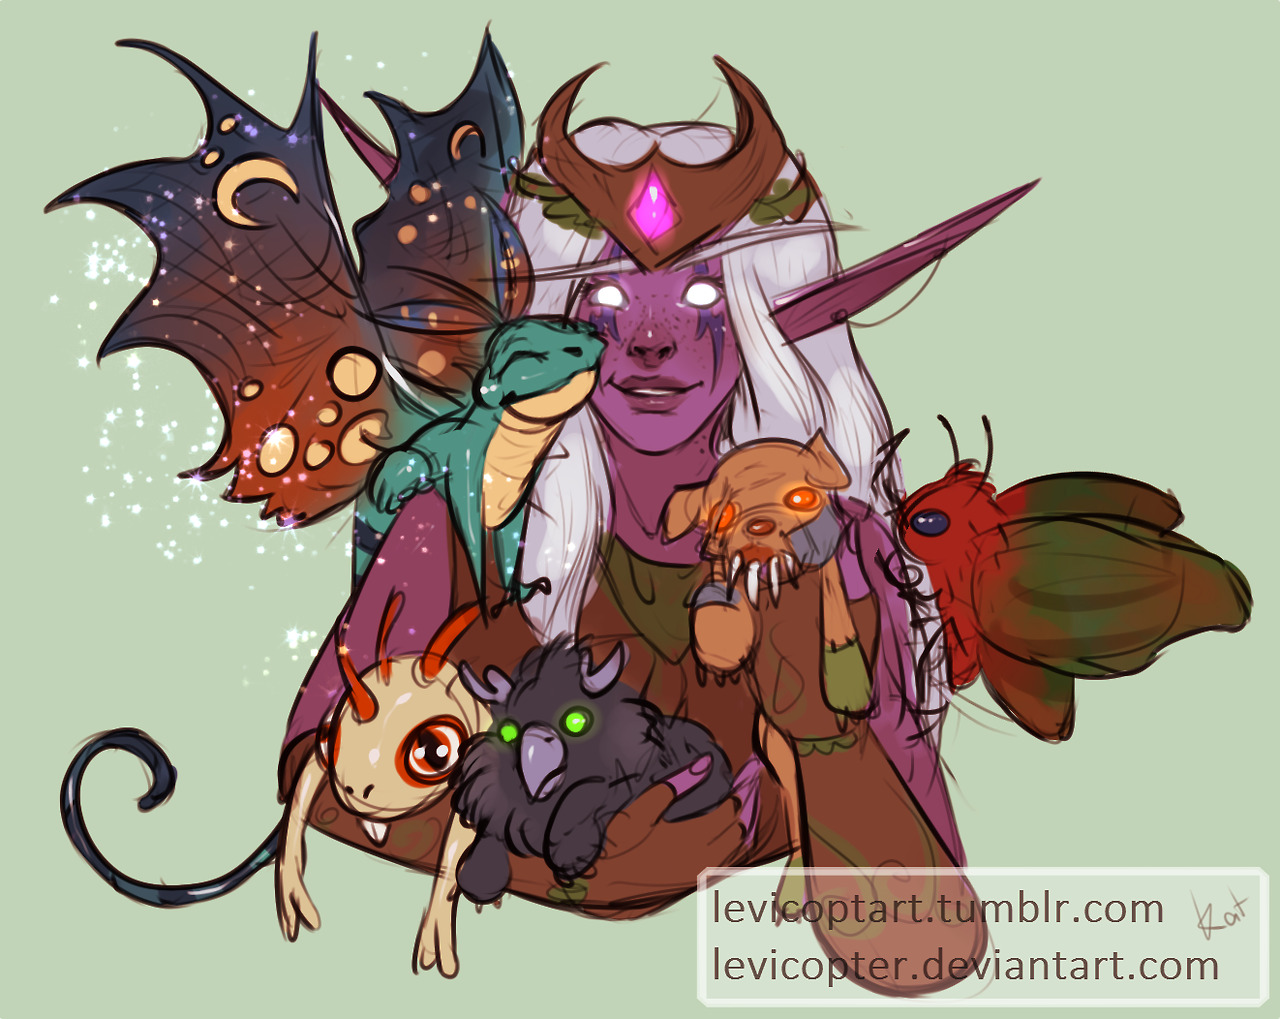 levicoptart: Lethee is the mother of a lot of motherless creatures (and some orphan